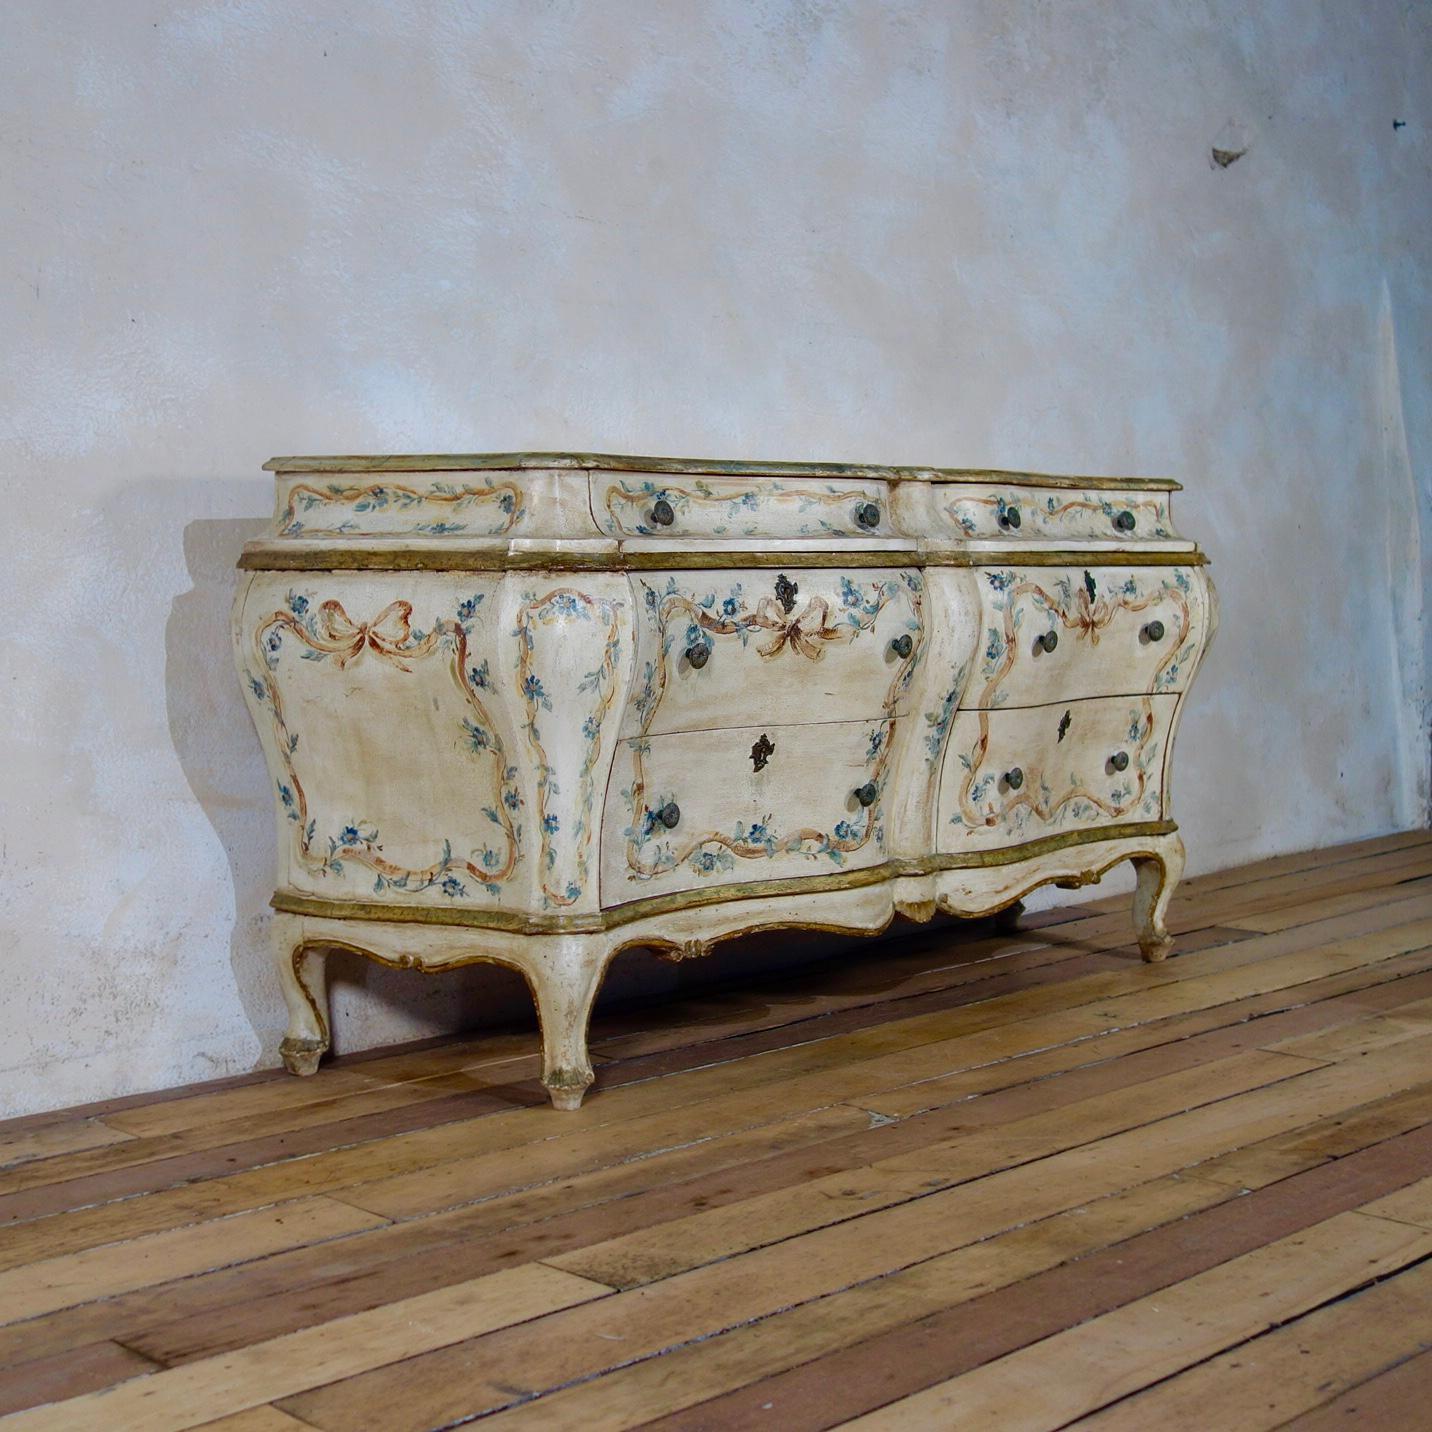 An exceptional 19th century Italian - venetian original painted bombe sideboard - Commode. Displaying a simulated marble top above six floral decorated serpentine drawers, raised on squat cabriole legs. 

Height - 69 cm
Width - 146 cm
Depth - 49 cm